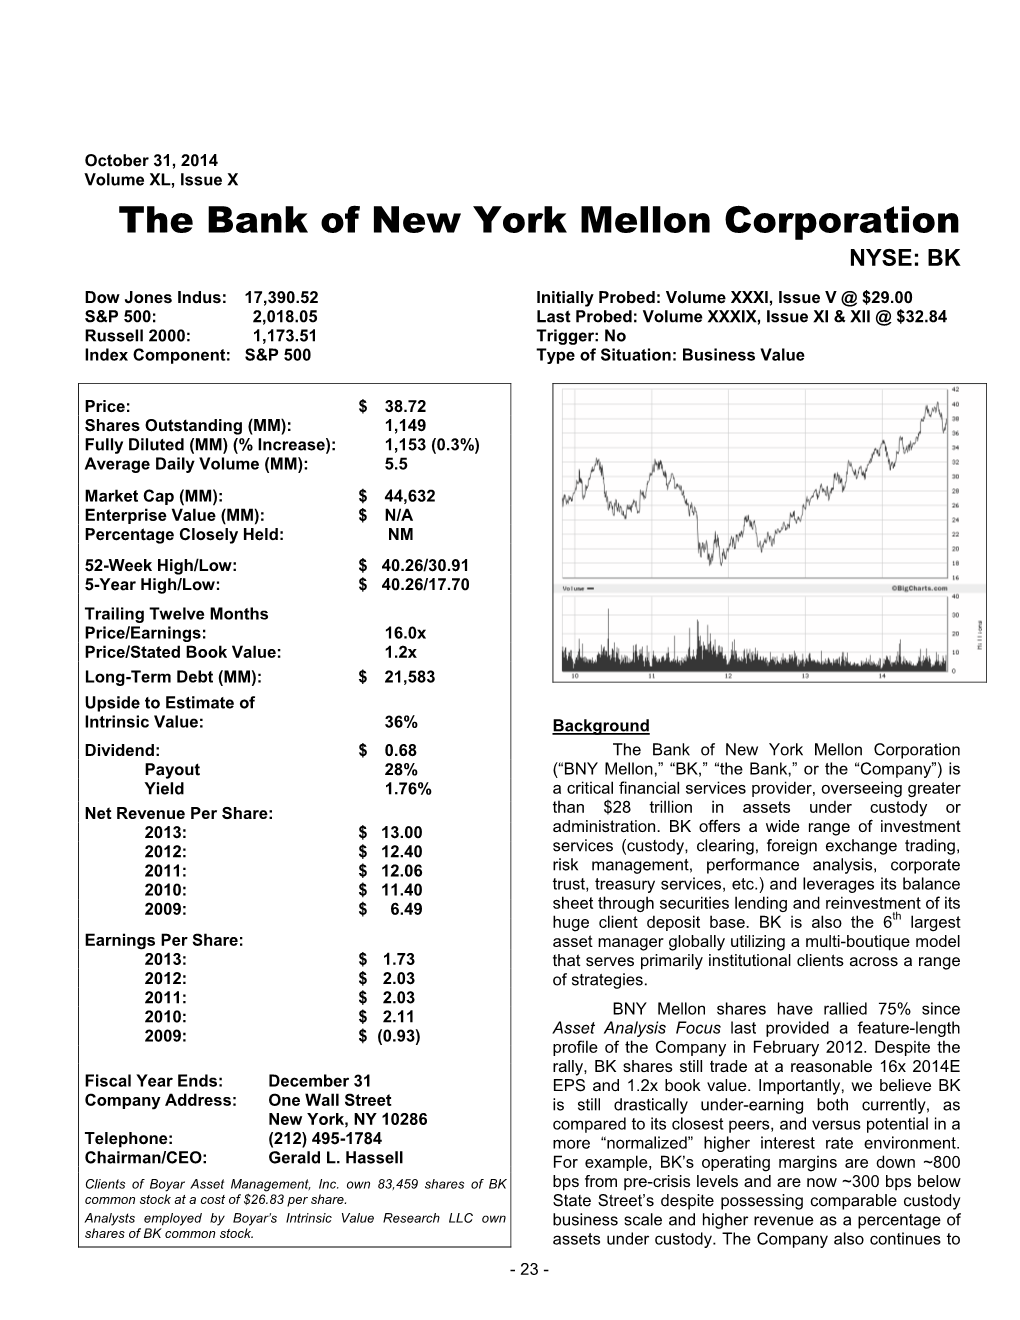 The Bank of New York Mellon Corporation NYSE: BK